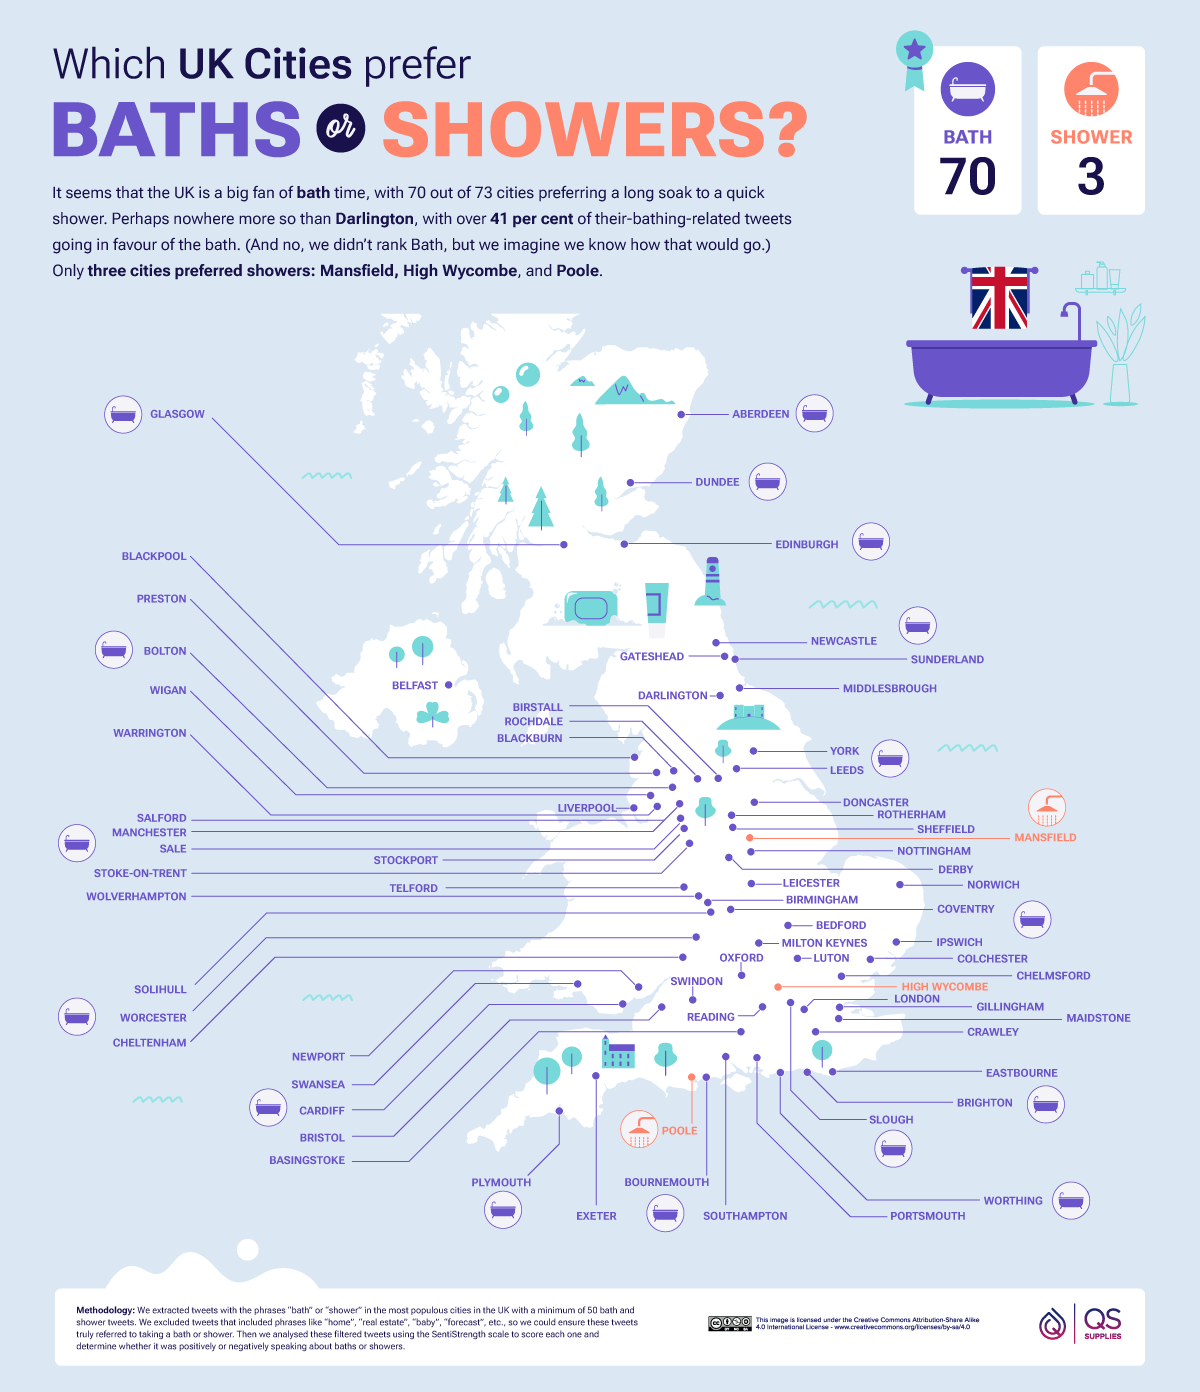 Which UK Cities prefer Baths or Shower?